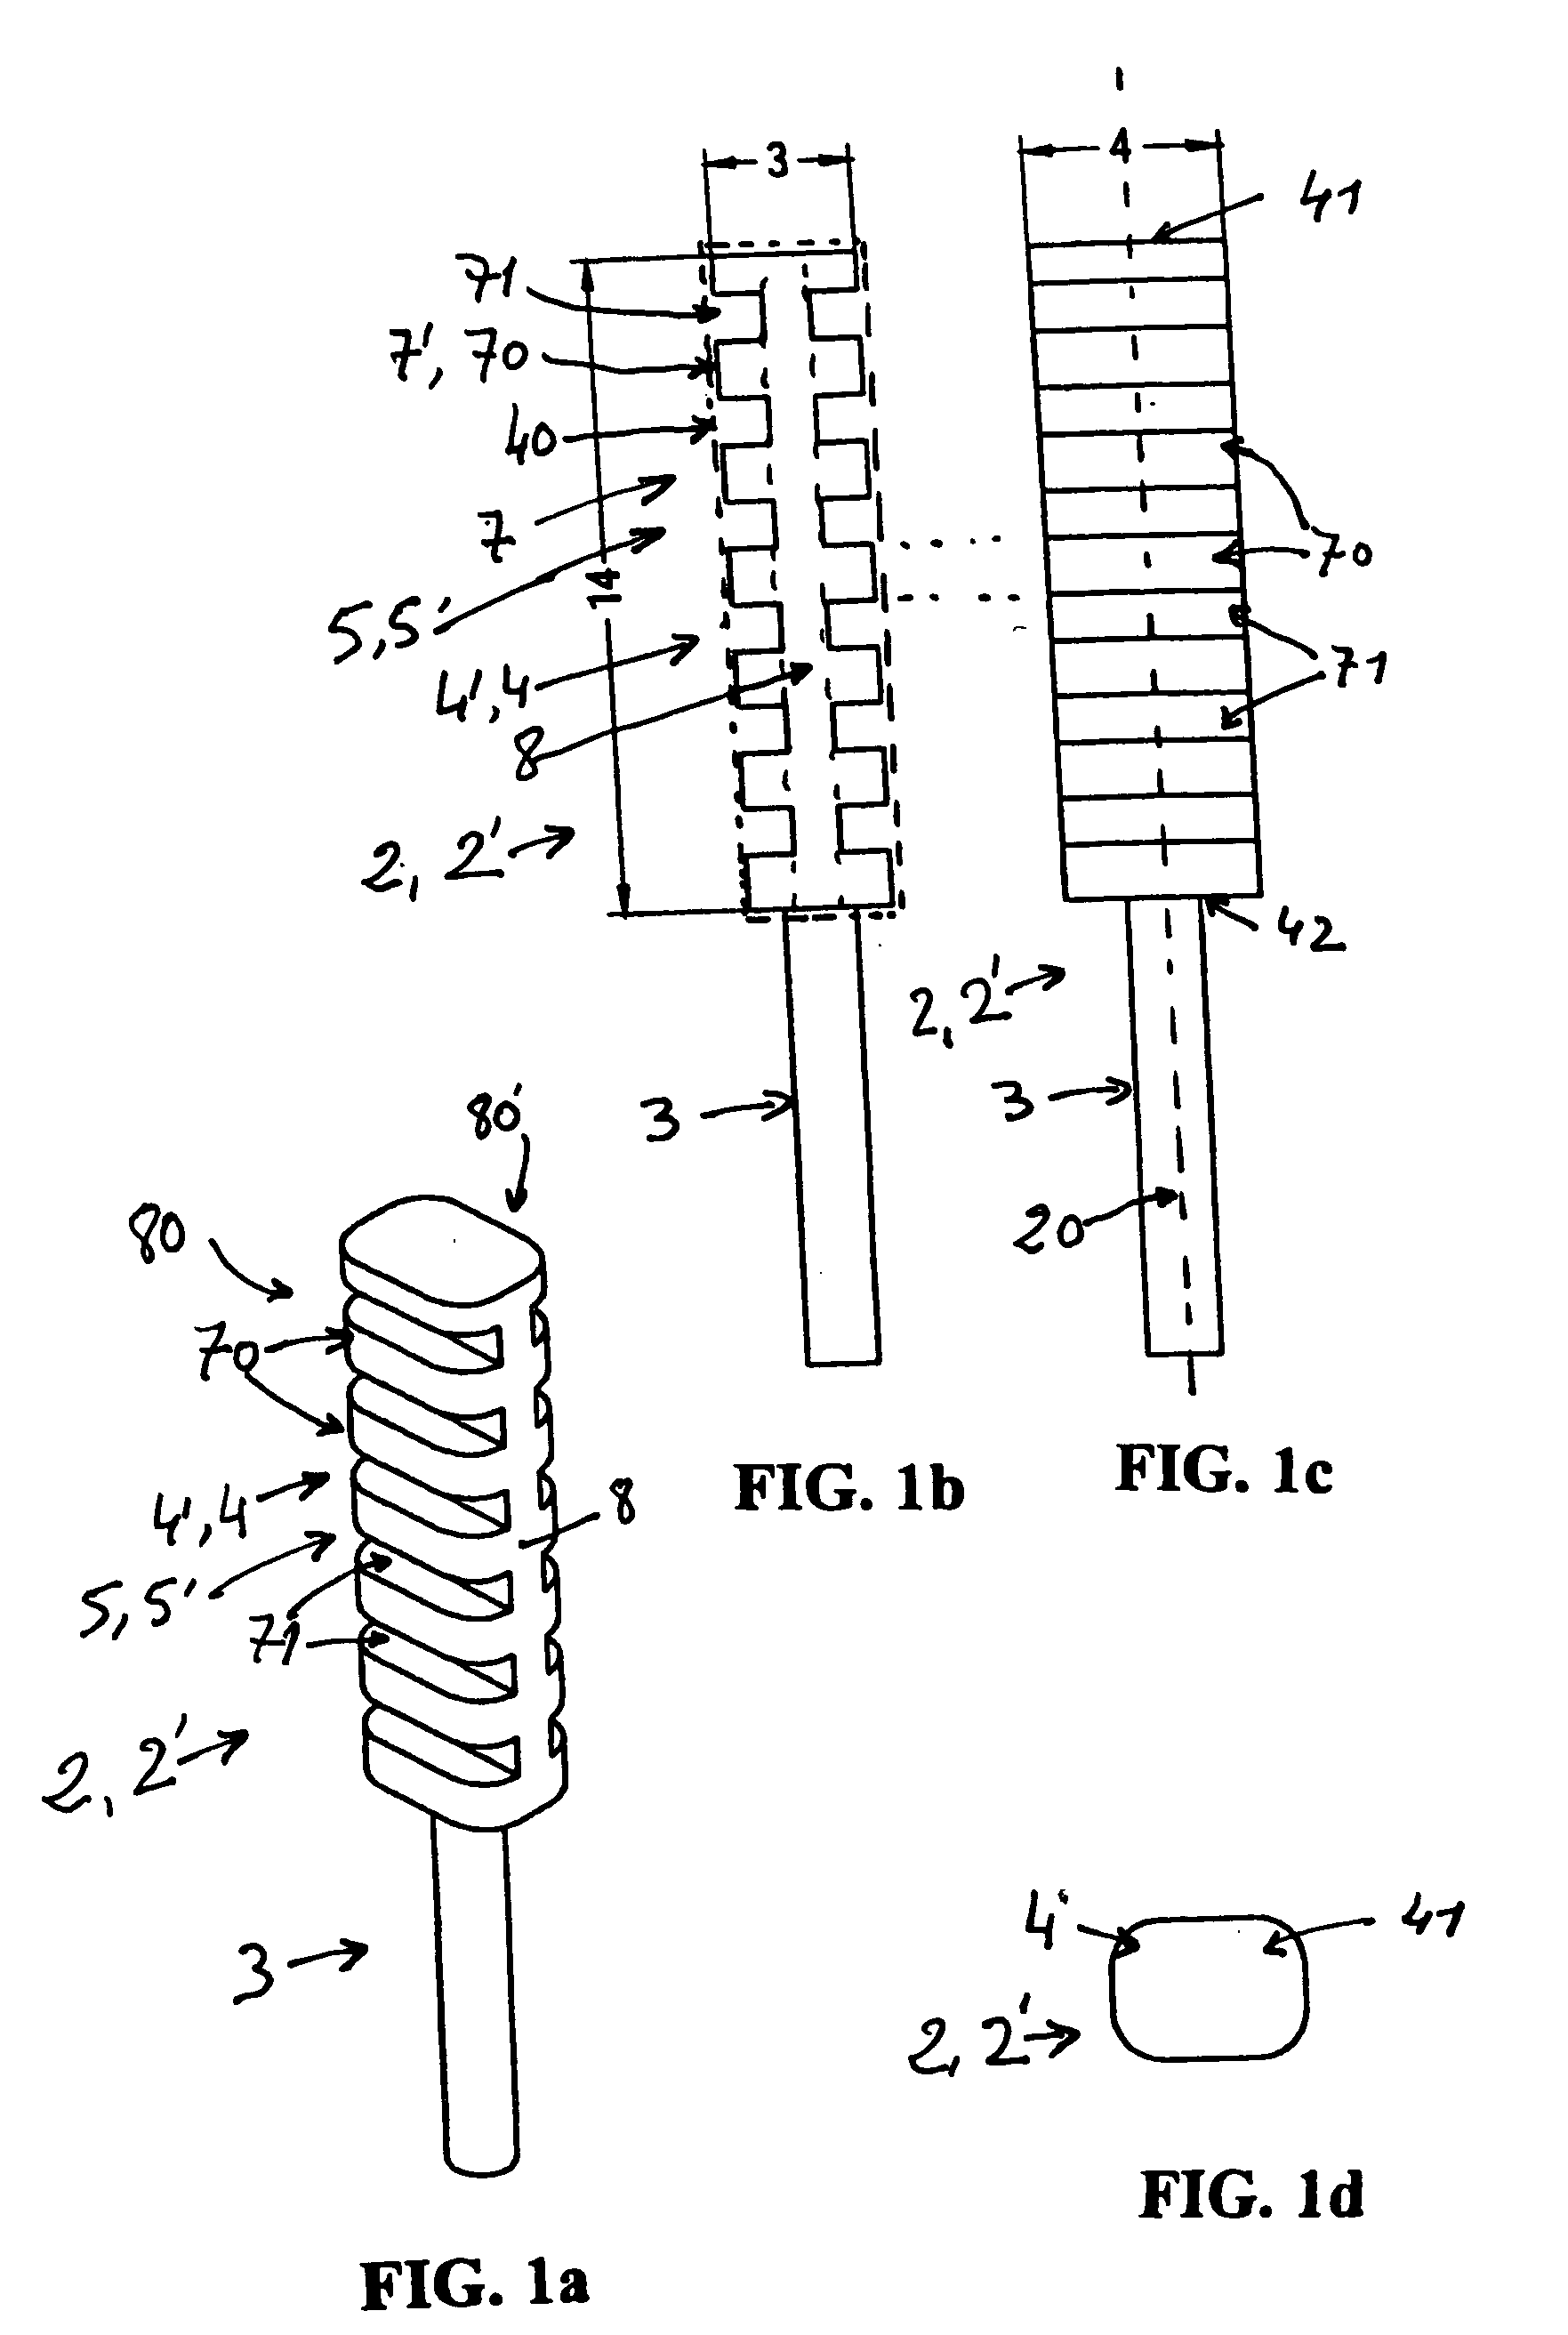 Applicator device for paste products, typically cosmetics